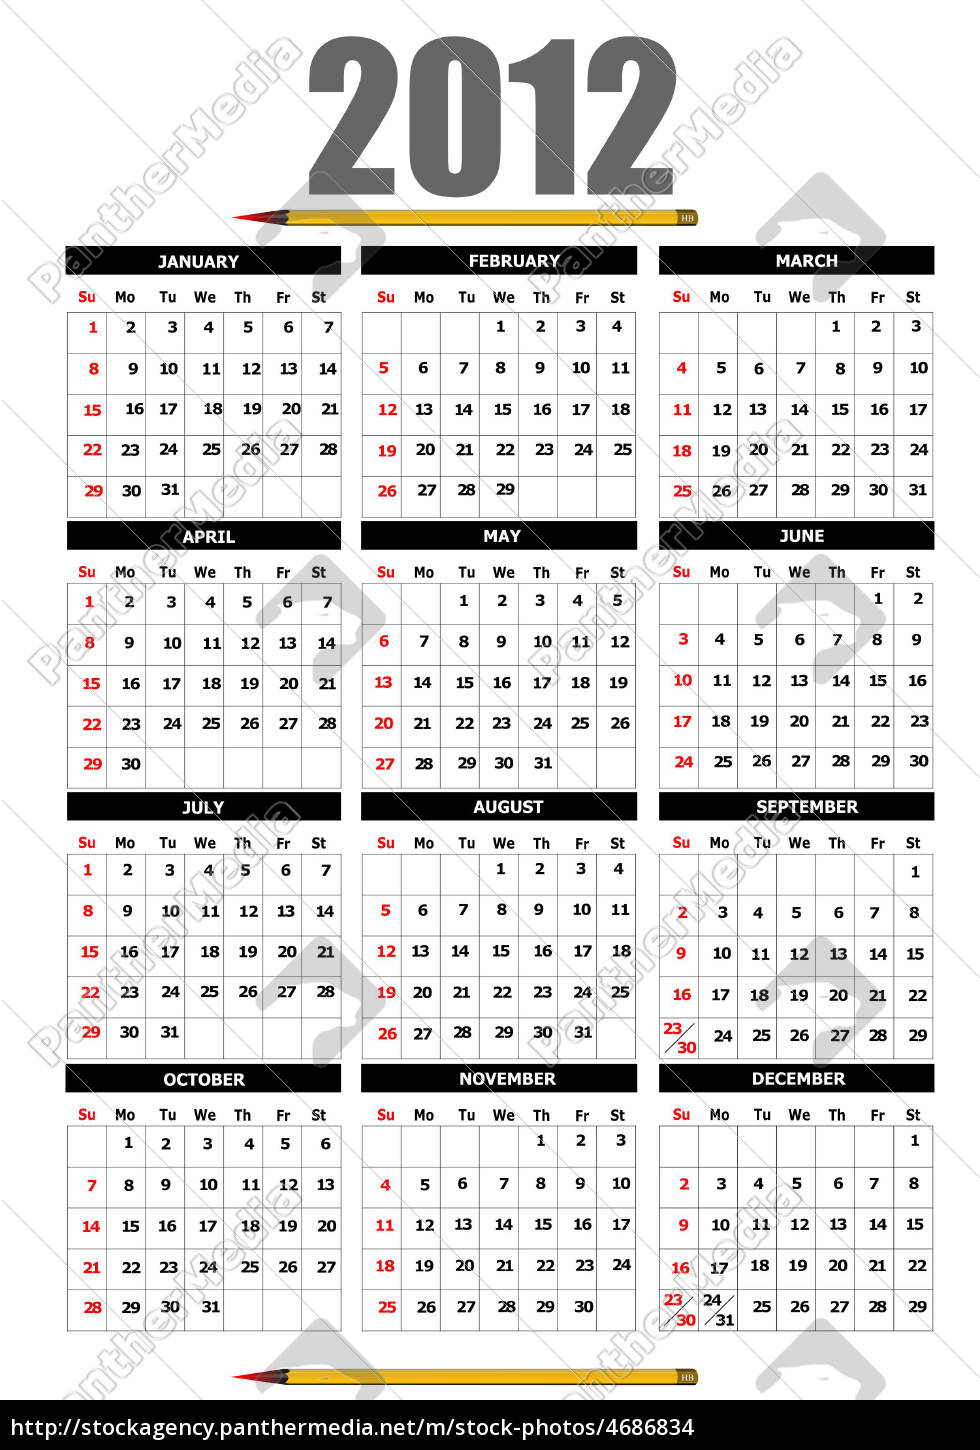 12 Calendar With Flower Image Vector Illustration Royalty Free Image Panthermedia Stock Agency